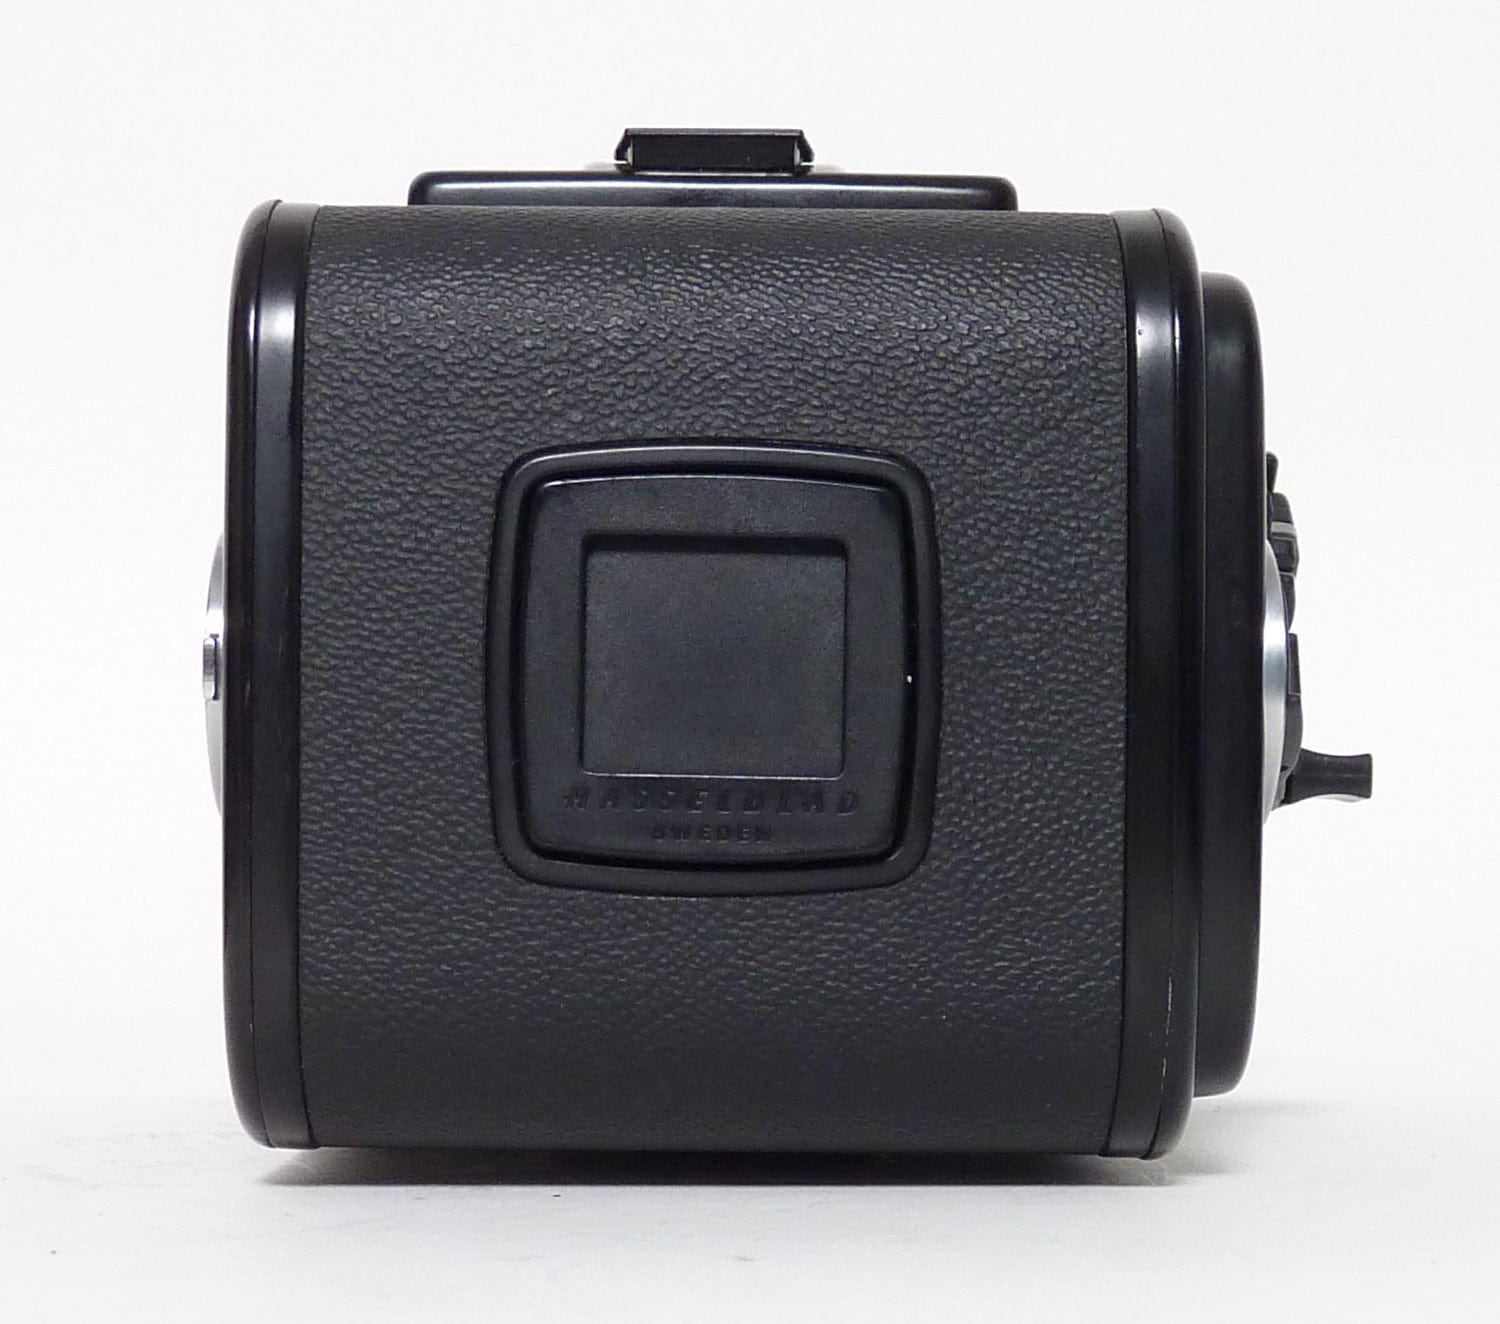 Hasselblad 500 C/M Black with A12 Back - Waist Level Finder - Cross  Focusing Screen